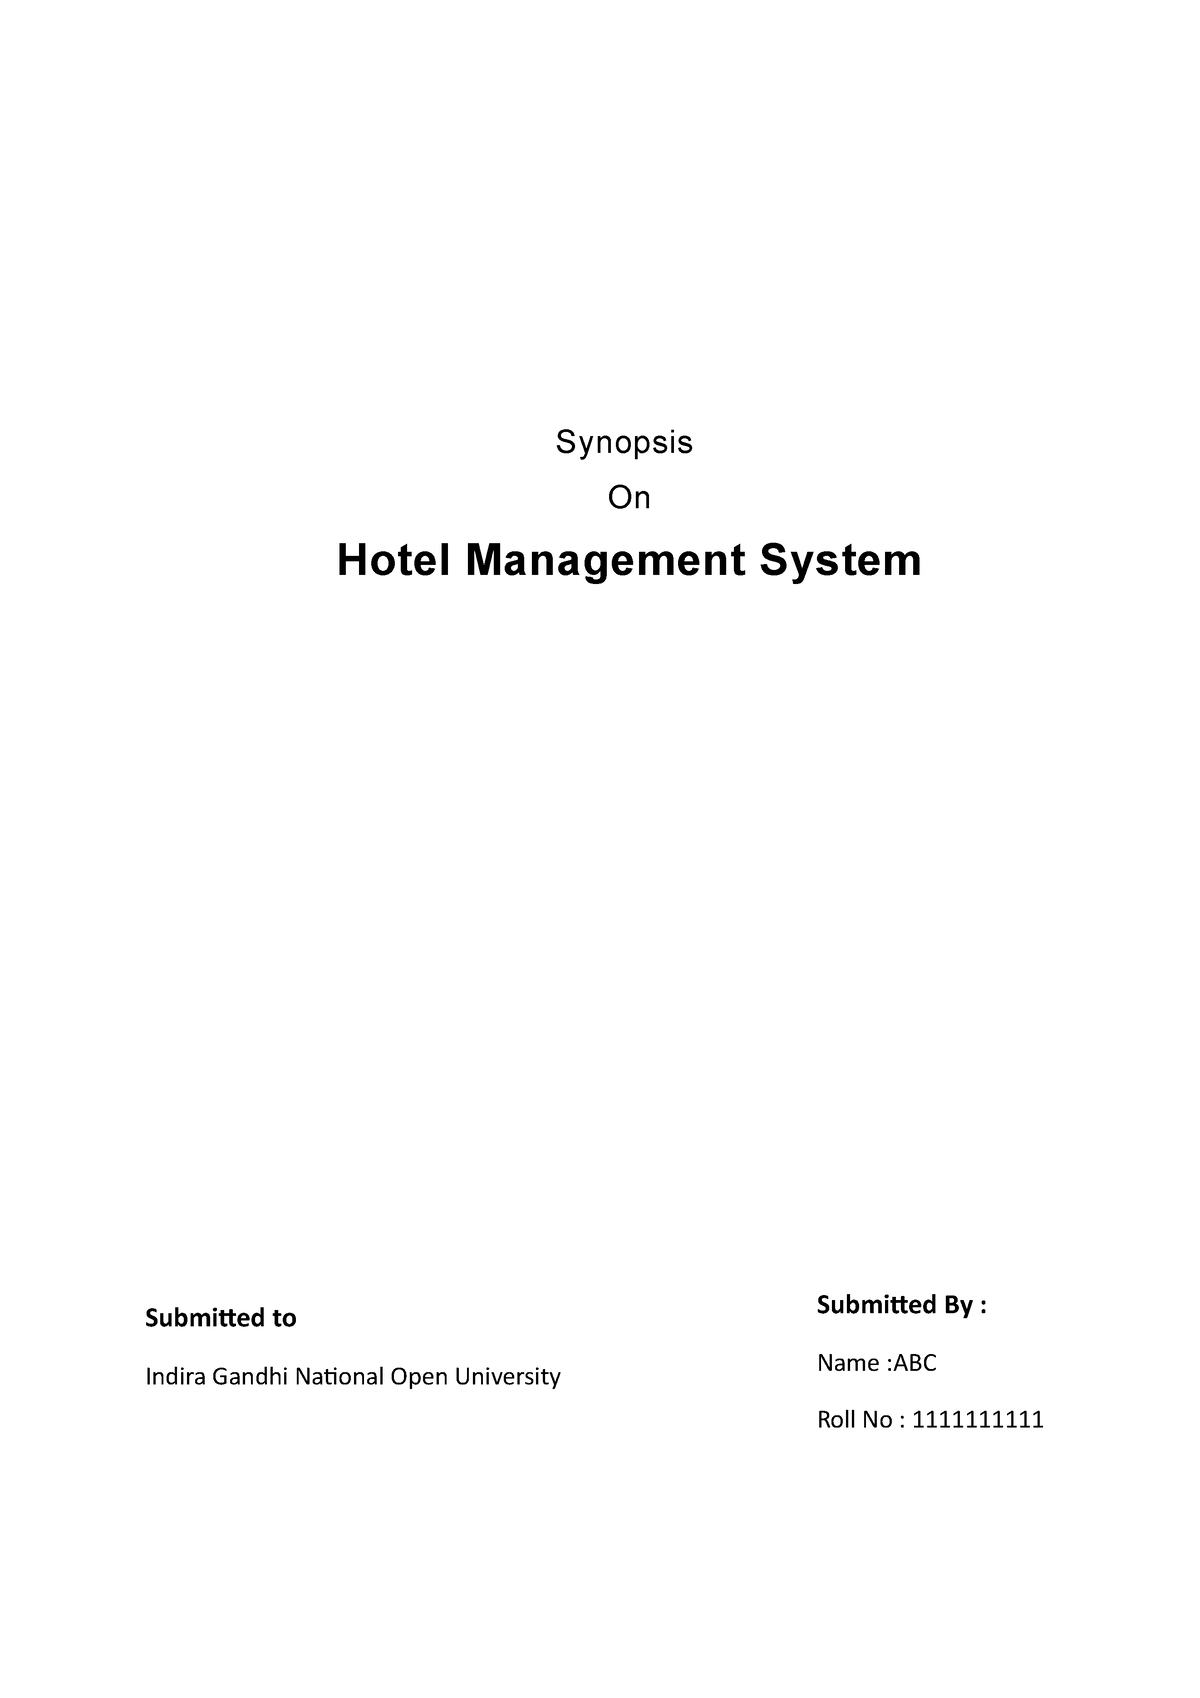 Synopsis on Hotel Management System - ####### Synopsis ####### On Hotel ...